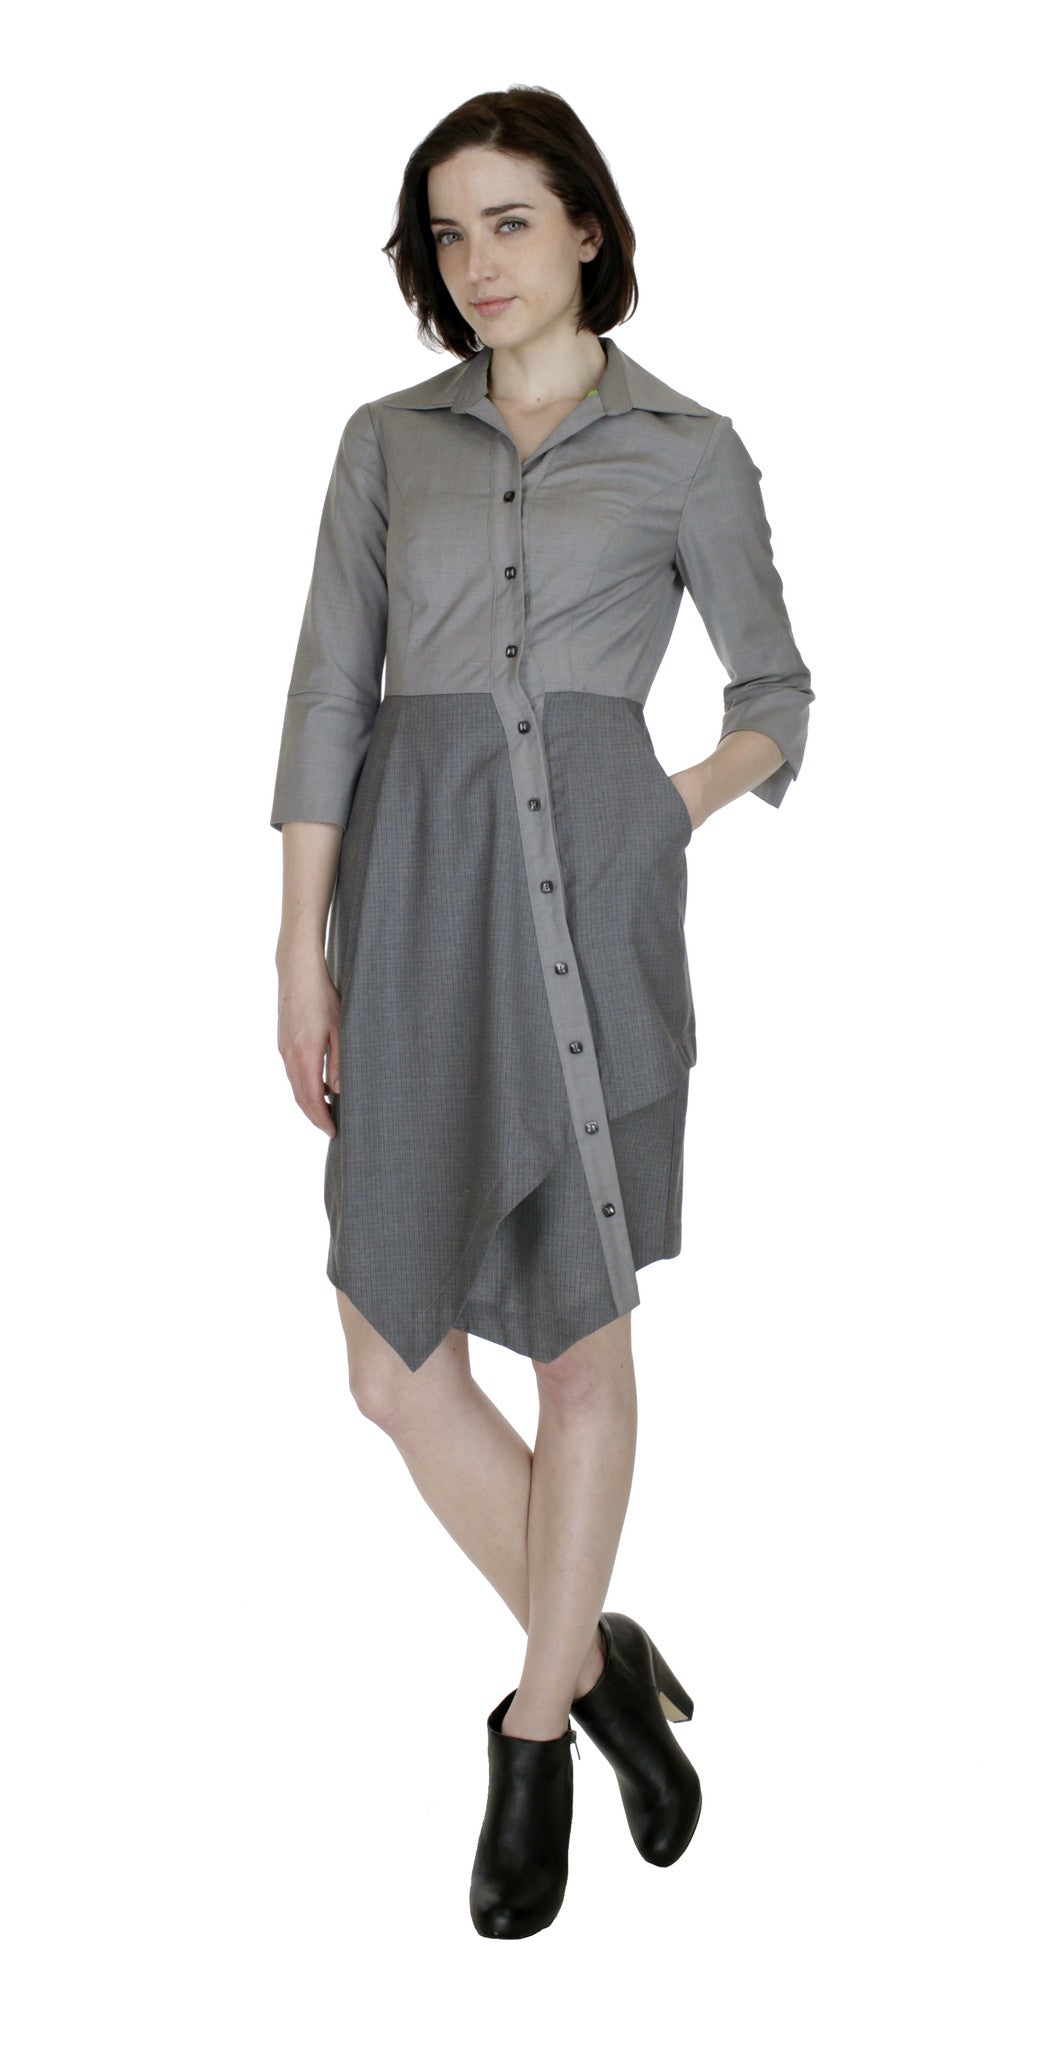 Asym Placket Double Tier Colorblock Shirtdress